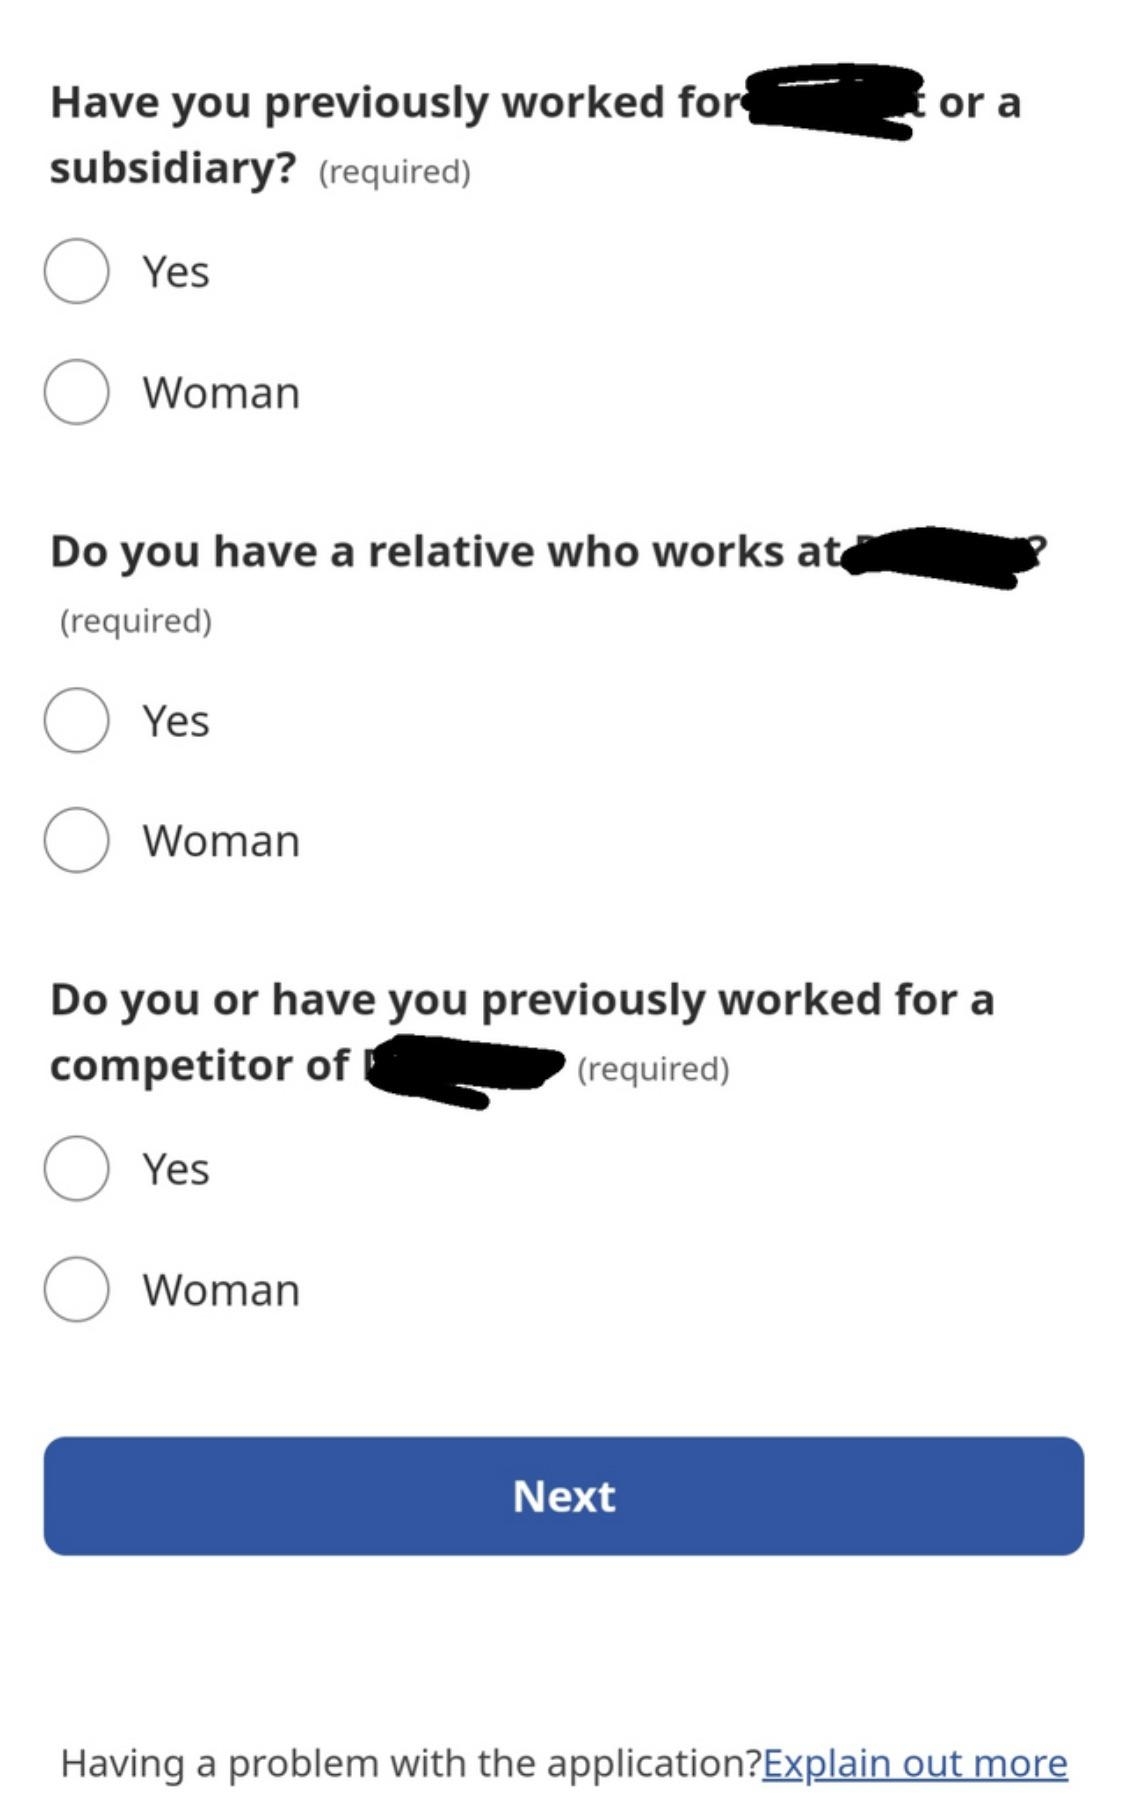 &quot;Yes&quot; and &quot;Woman&quot;